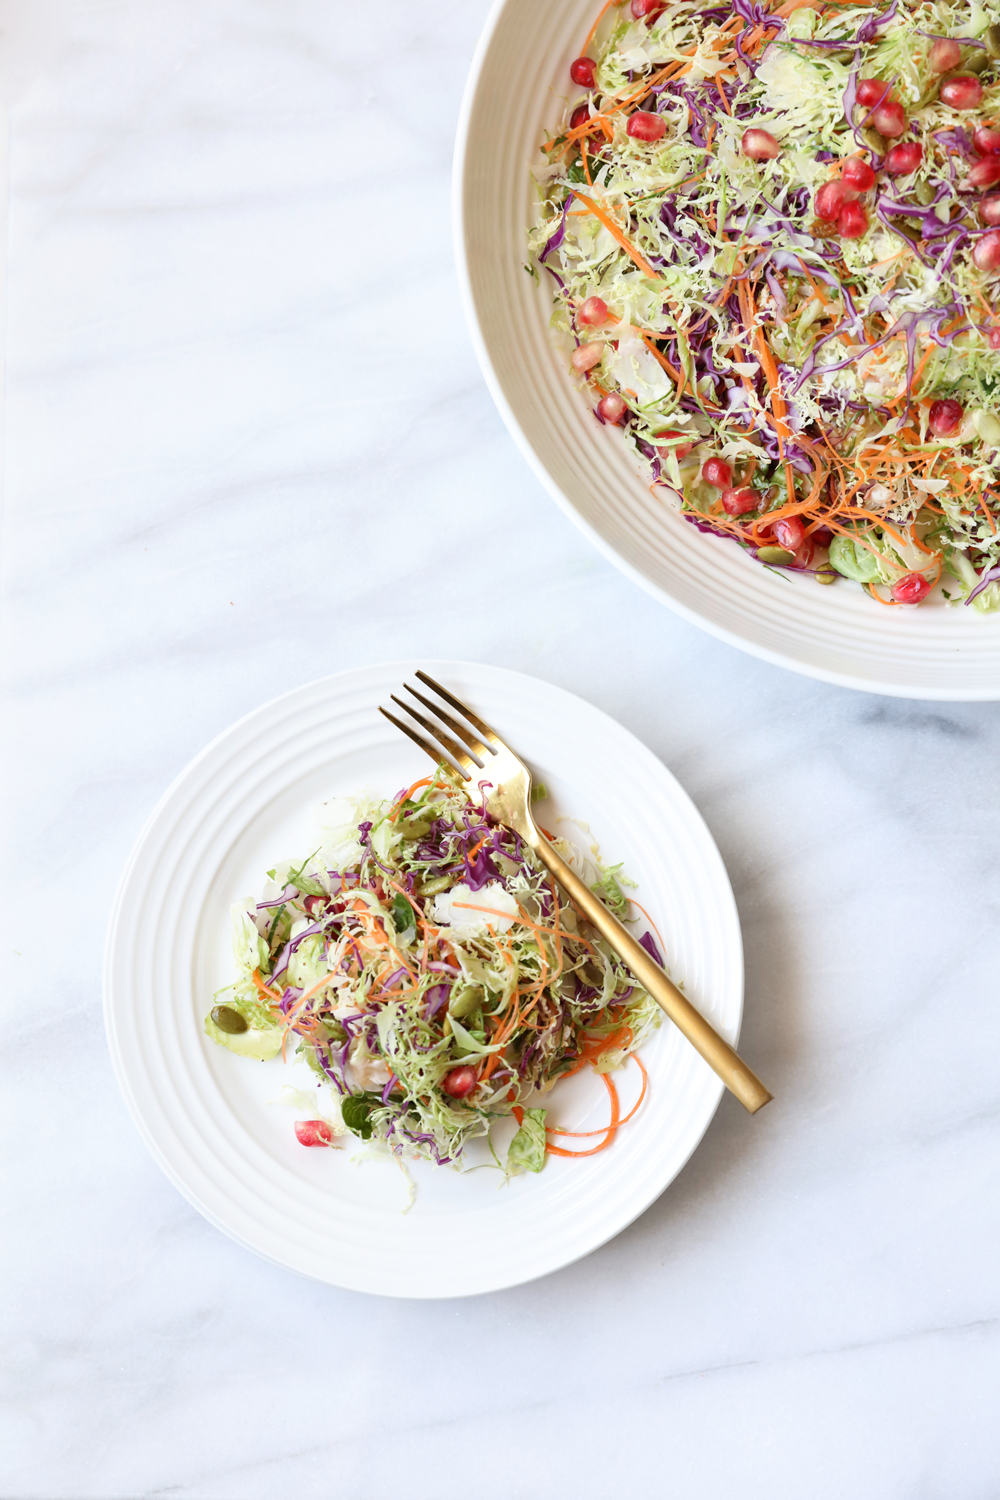 Julies's-Kitchen_Brussels-sprout-slaw_3E3A4182